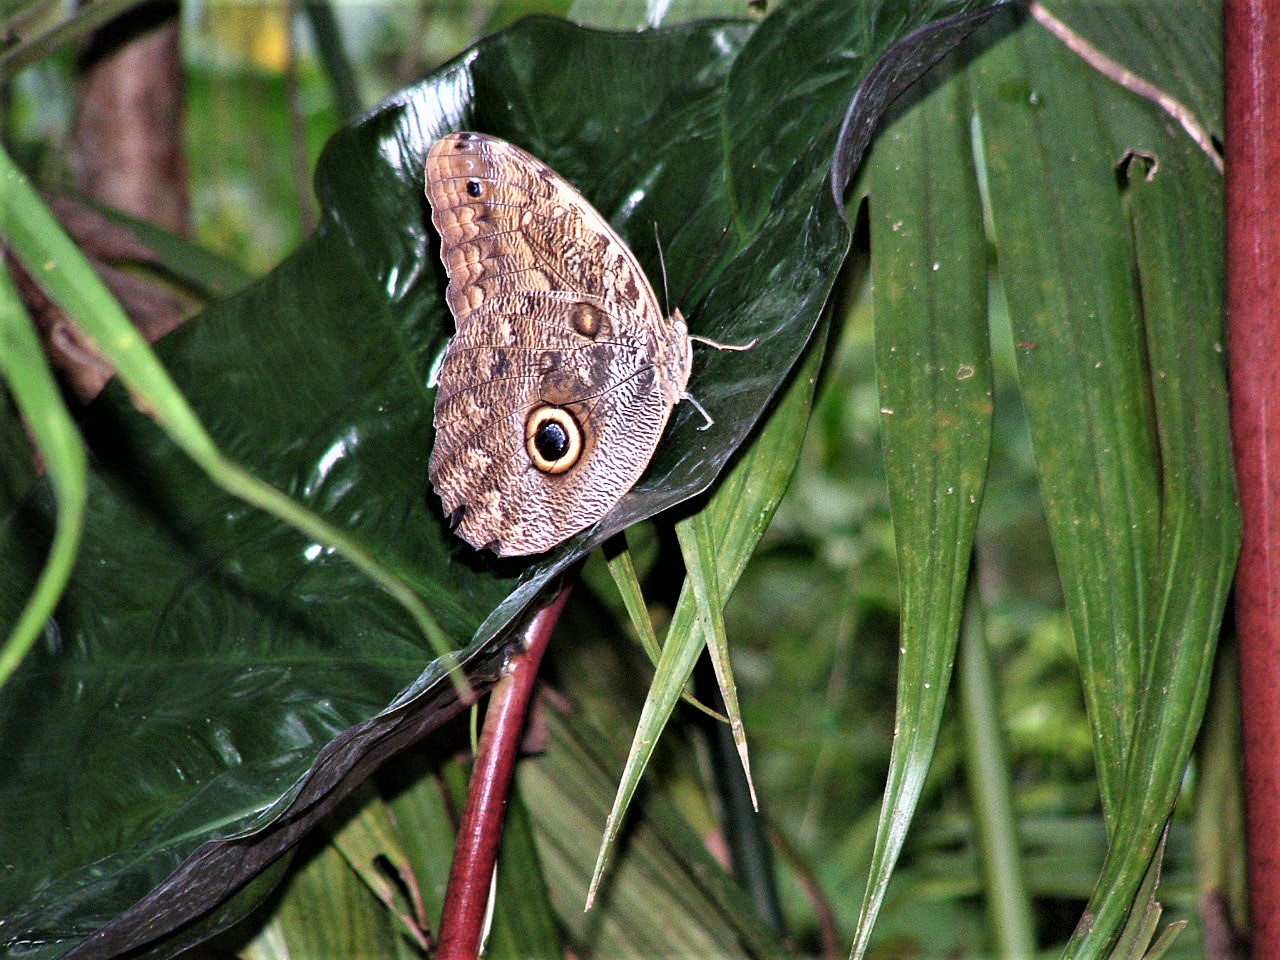 Butterfly on leaf in rainforest in Costa Rica